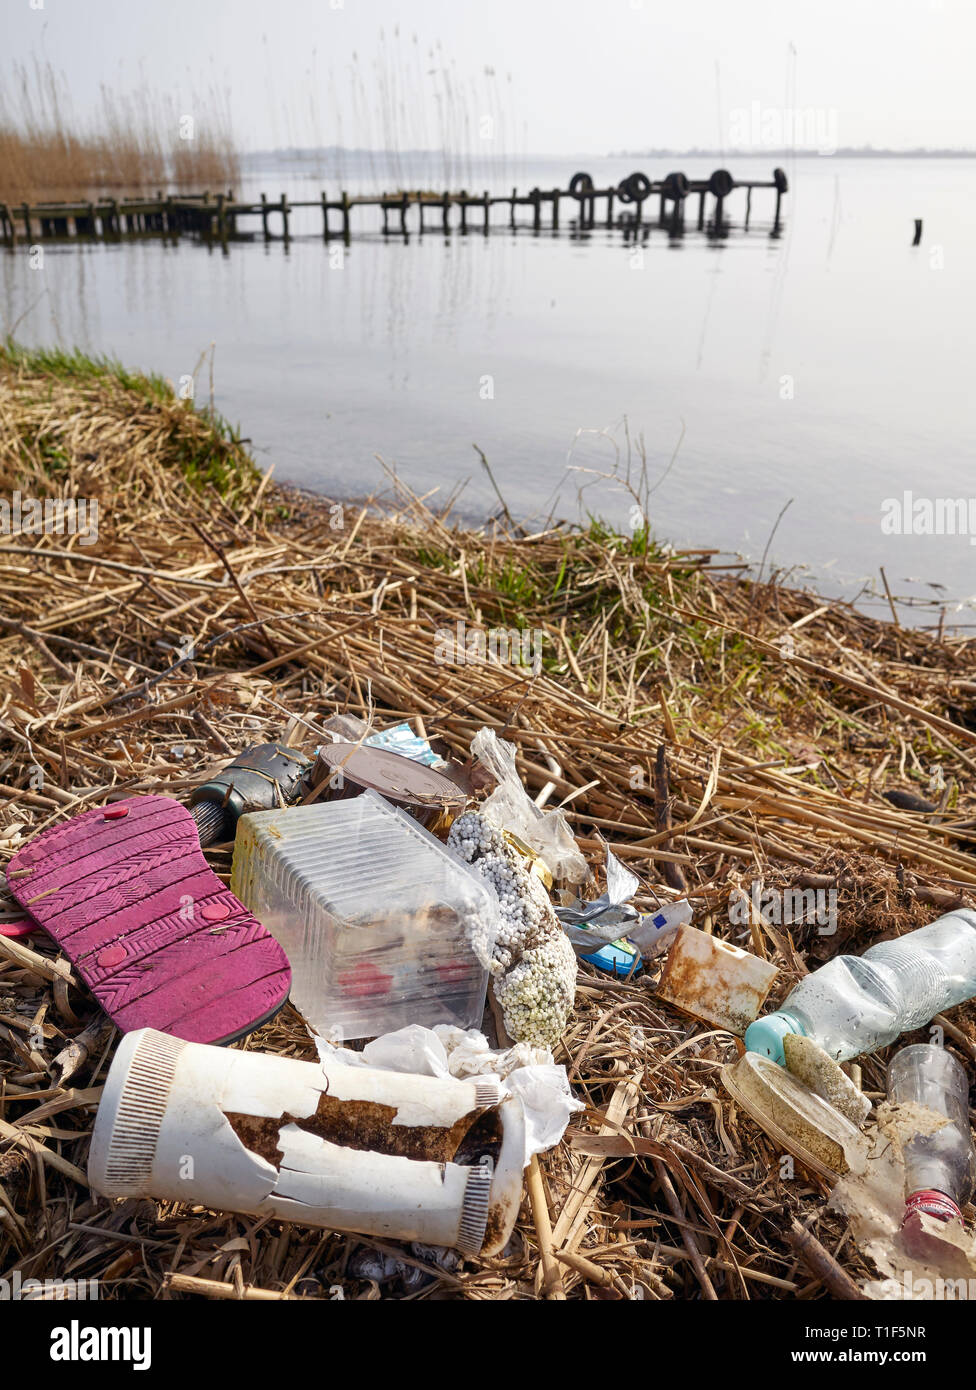 Garbage left by a river bank, environment pollution problem concept picture. Stock Photo